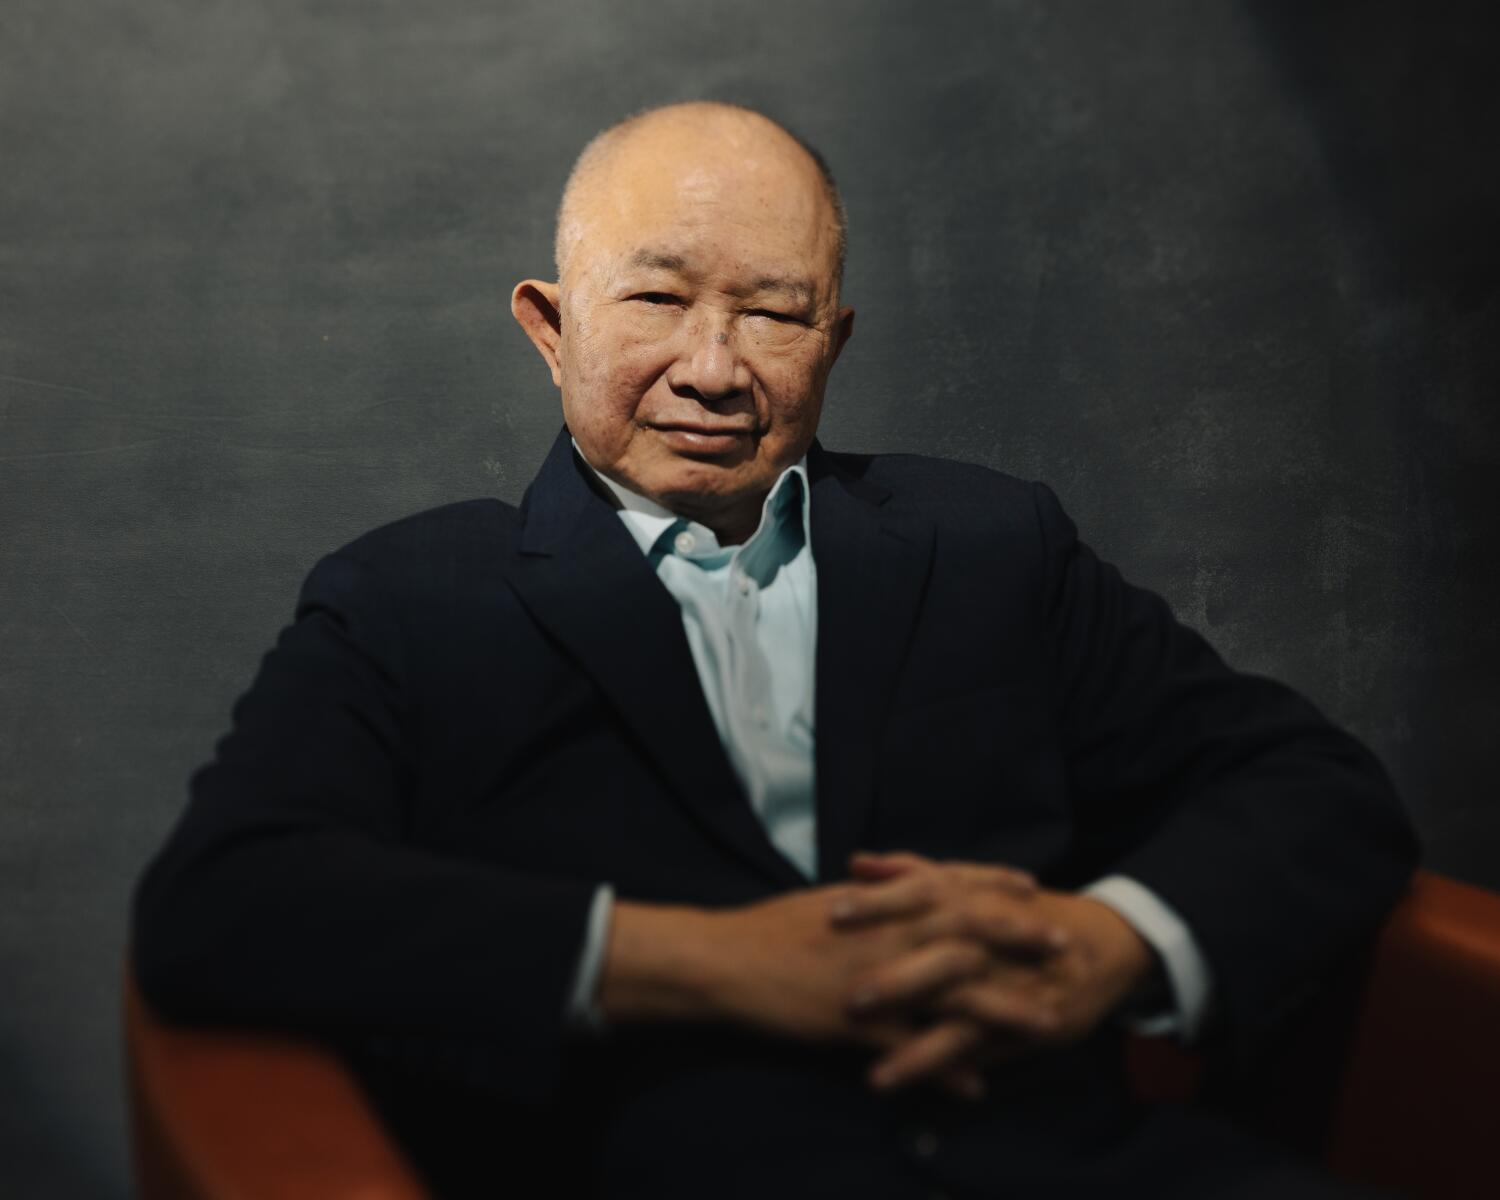 Action icon John Woo on why he loves L.A. and what brought him back to Hollywood